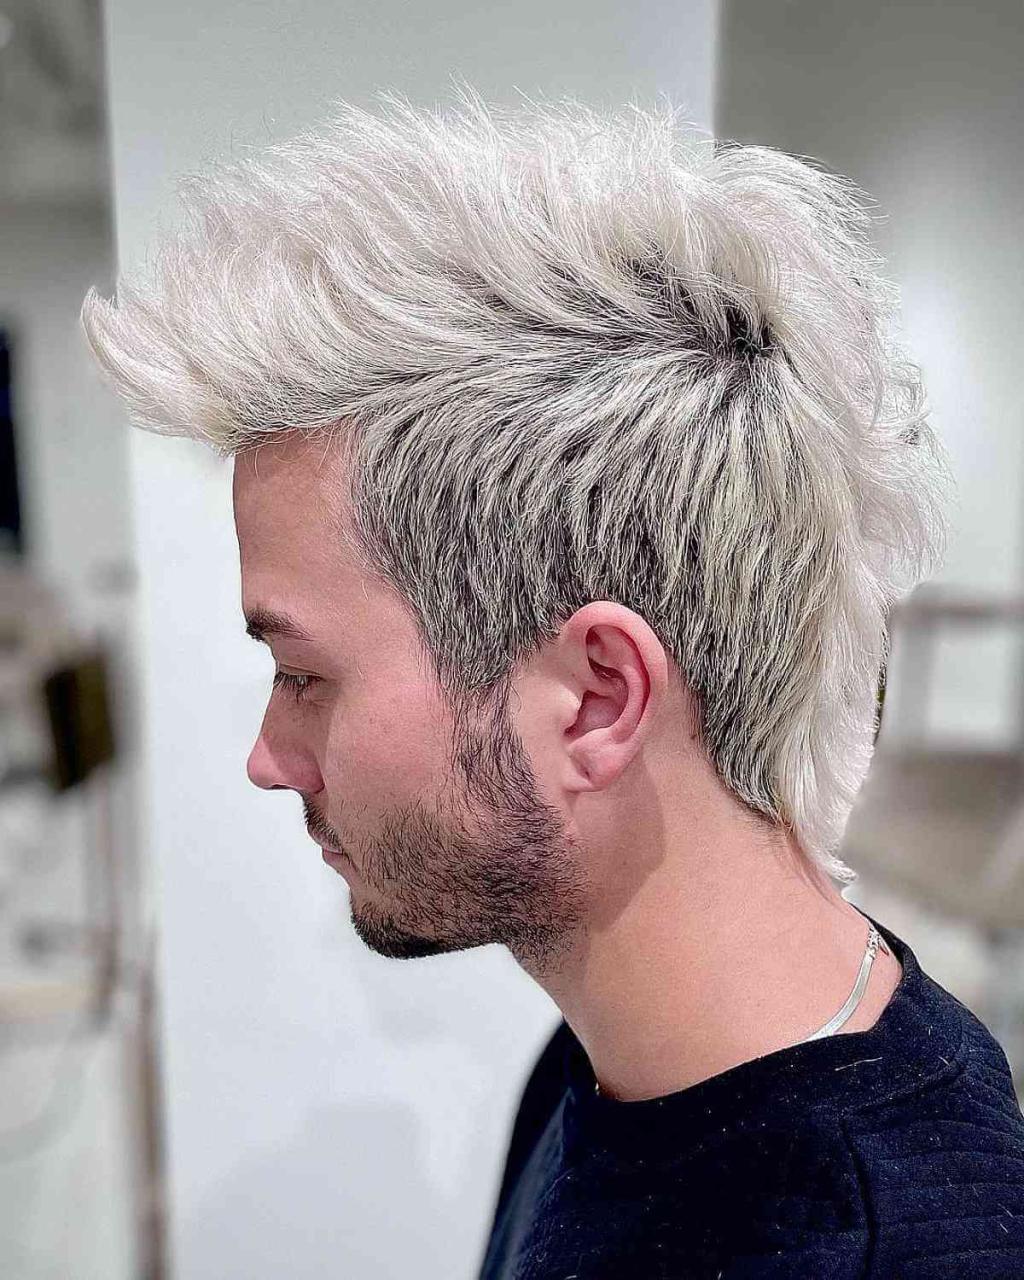 Hair Color For Men: 35 Examples Ranging From Vivids To Natural Hues